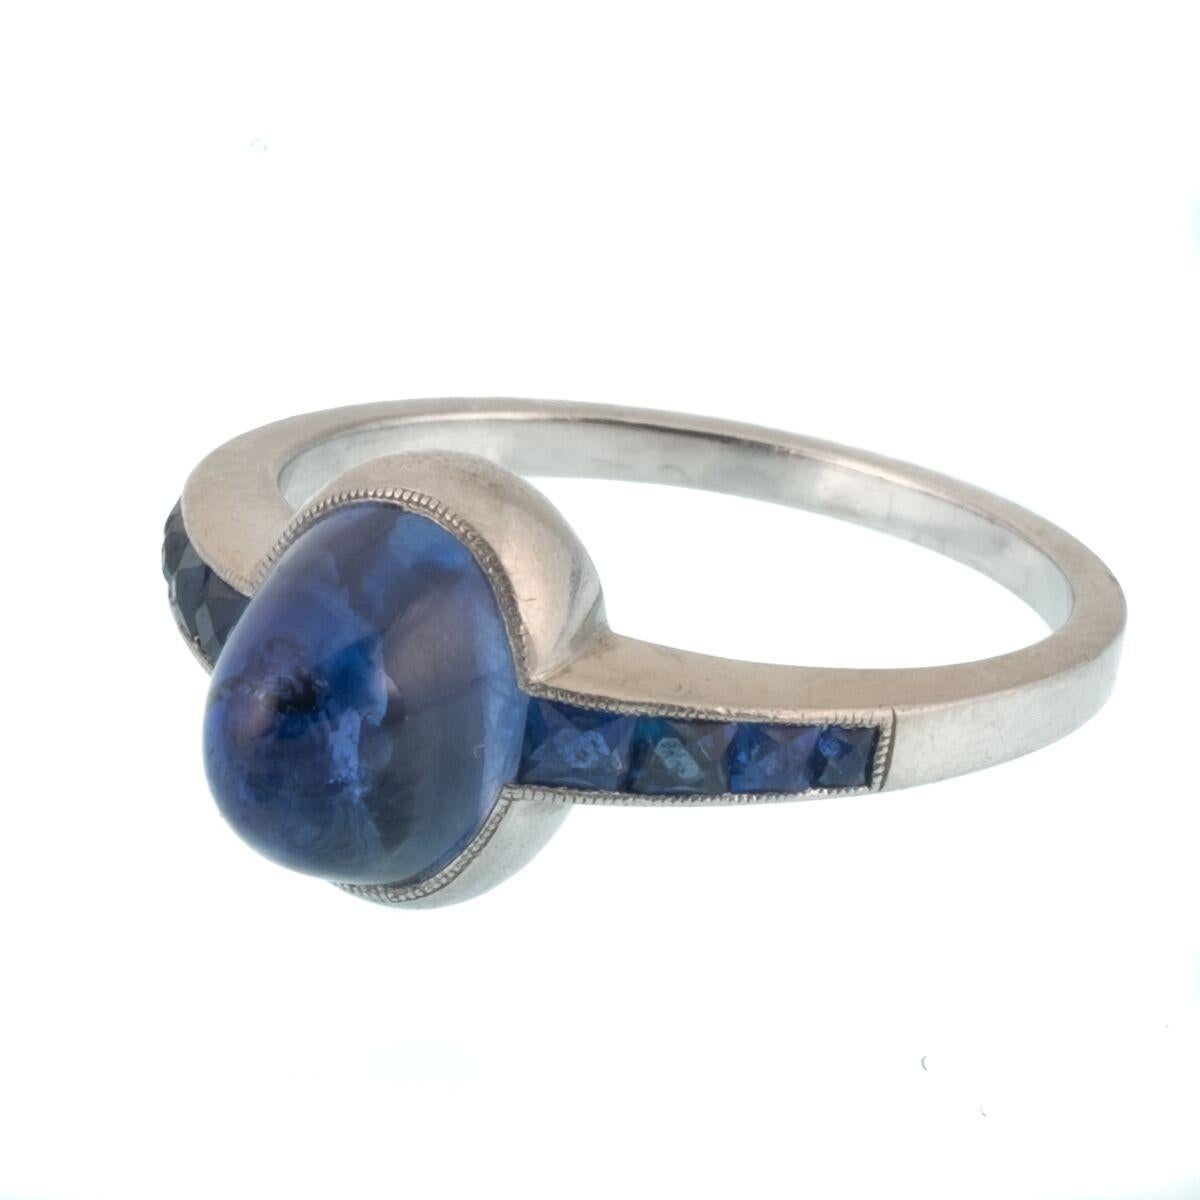 Art Deco Platinum and French Cut Sapphires Featuring a 1.3 Carat Cabochon Sapphire Ring For Sale